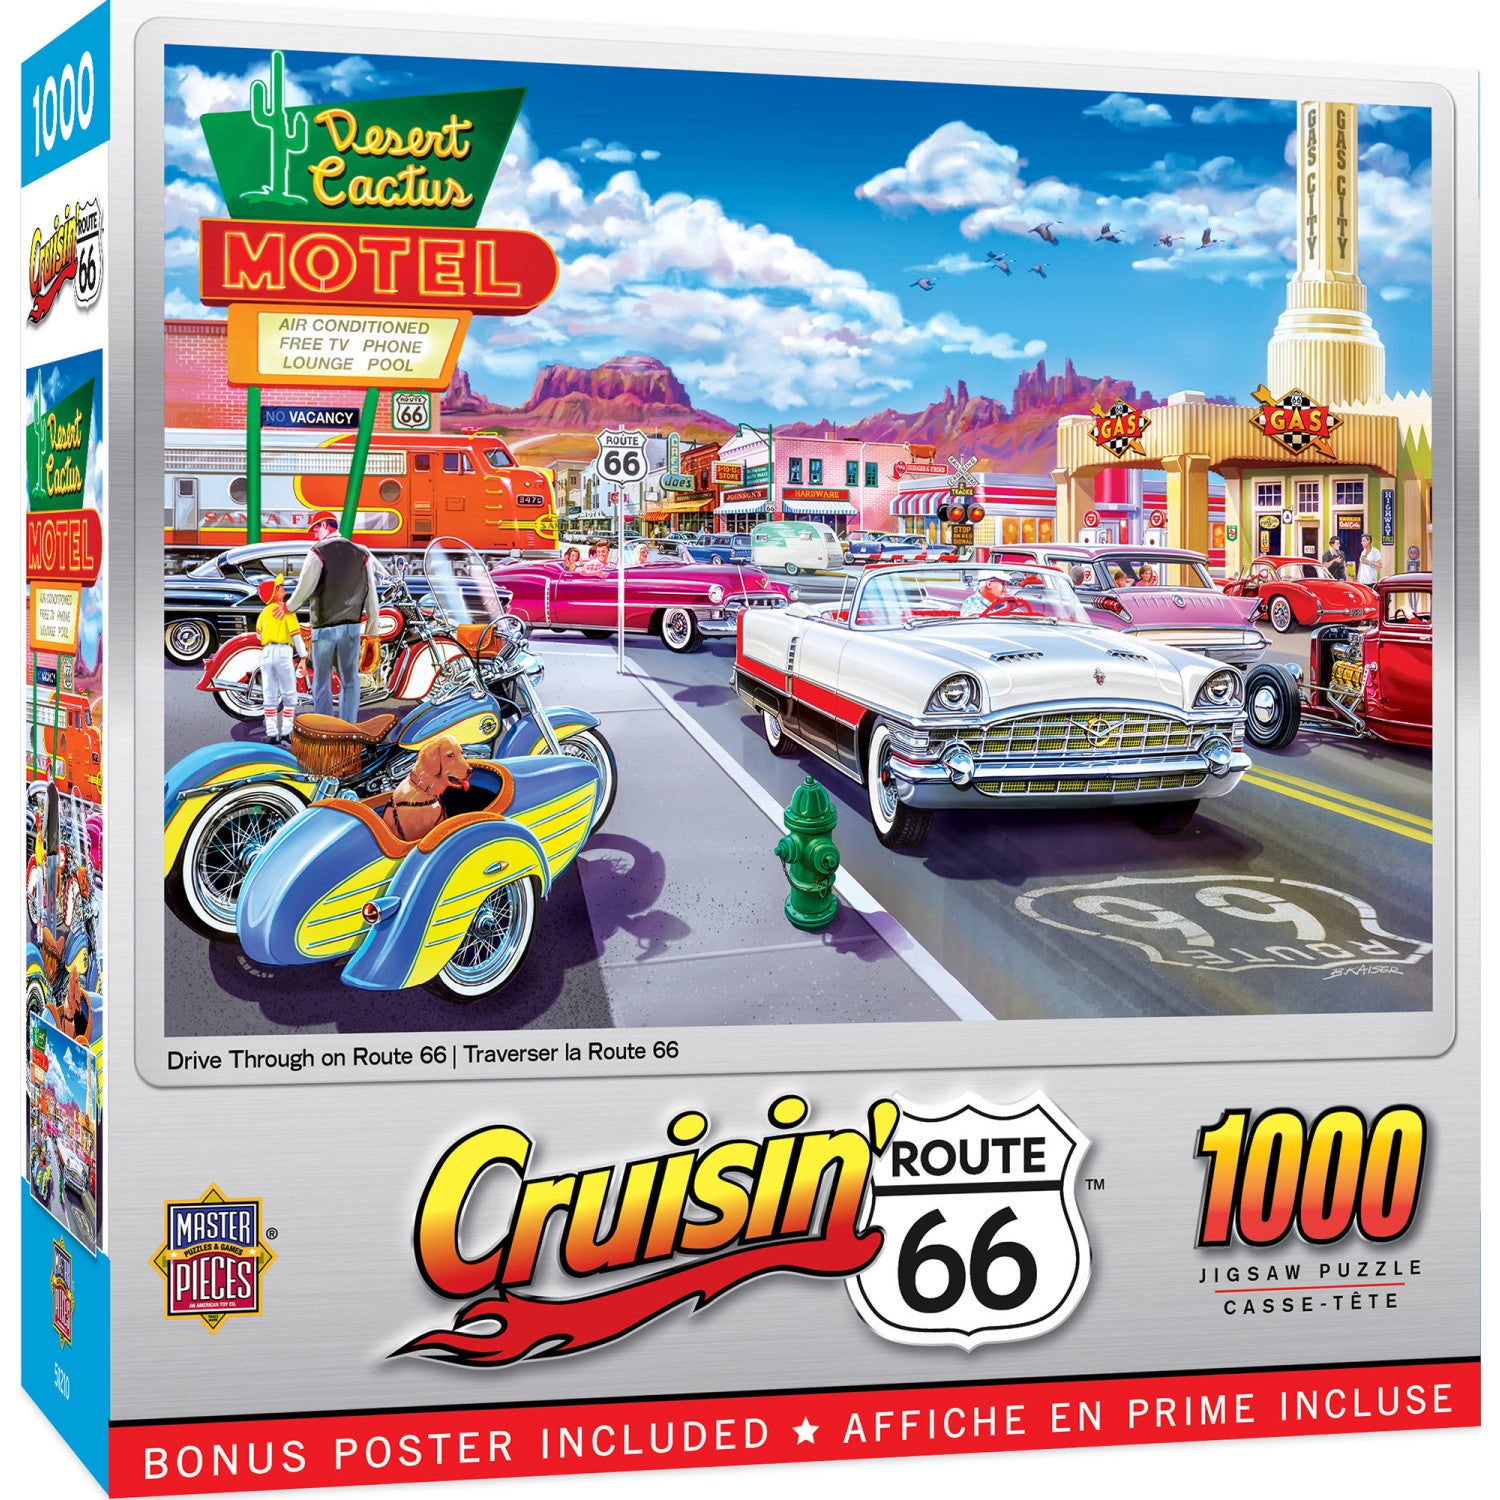 Cruisin' Route 66 - Drive Through on Route 66 1000 Piece Jigsaw Puzzle